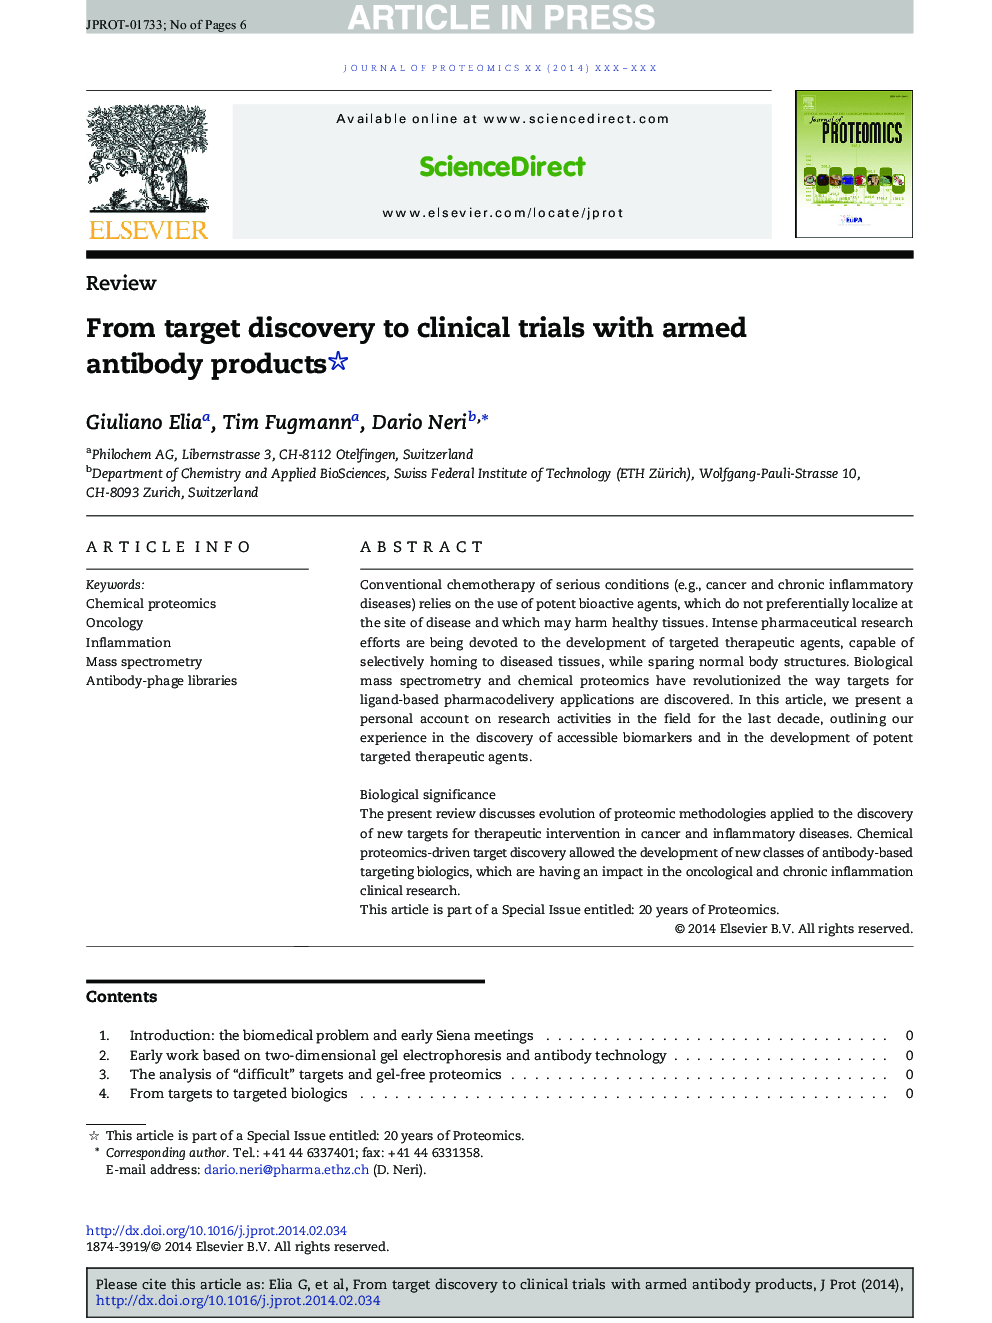 From target discovery to clinical trials with armed antibody products